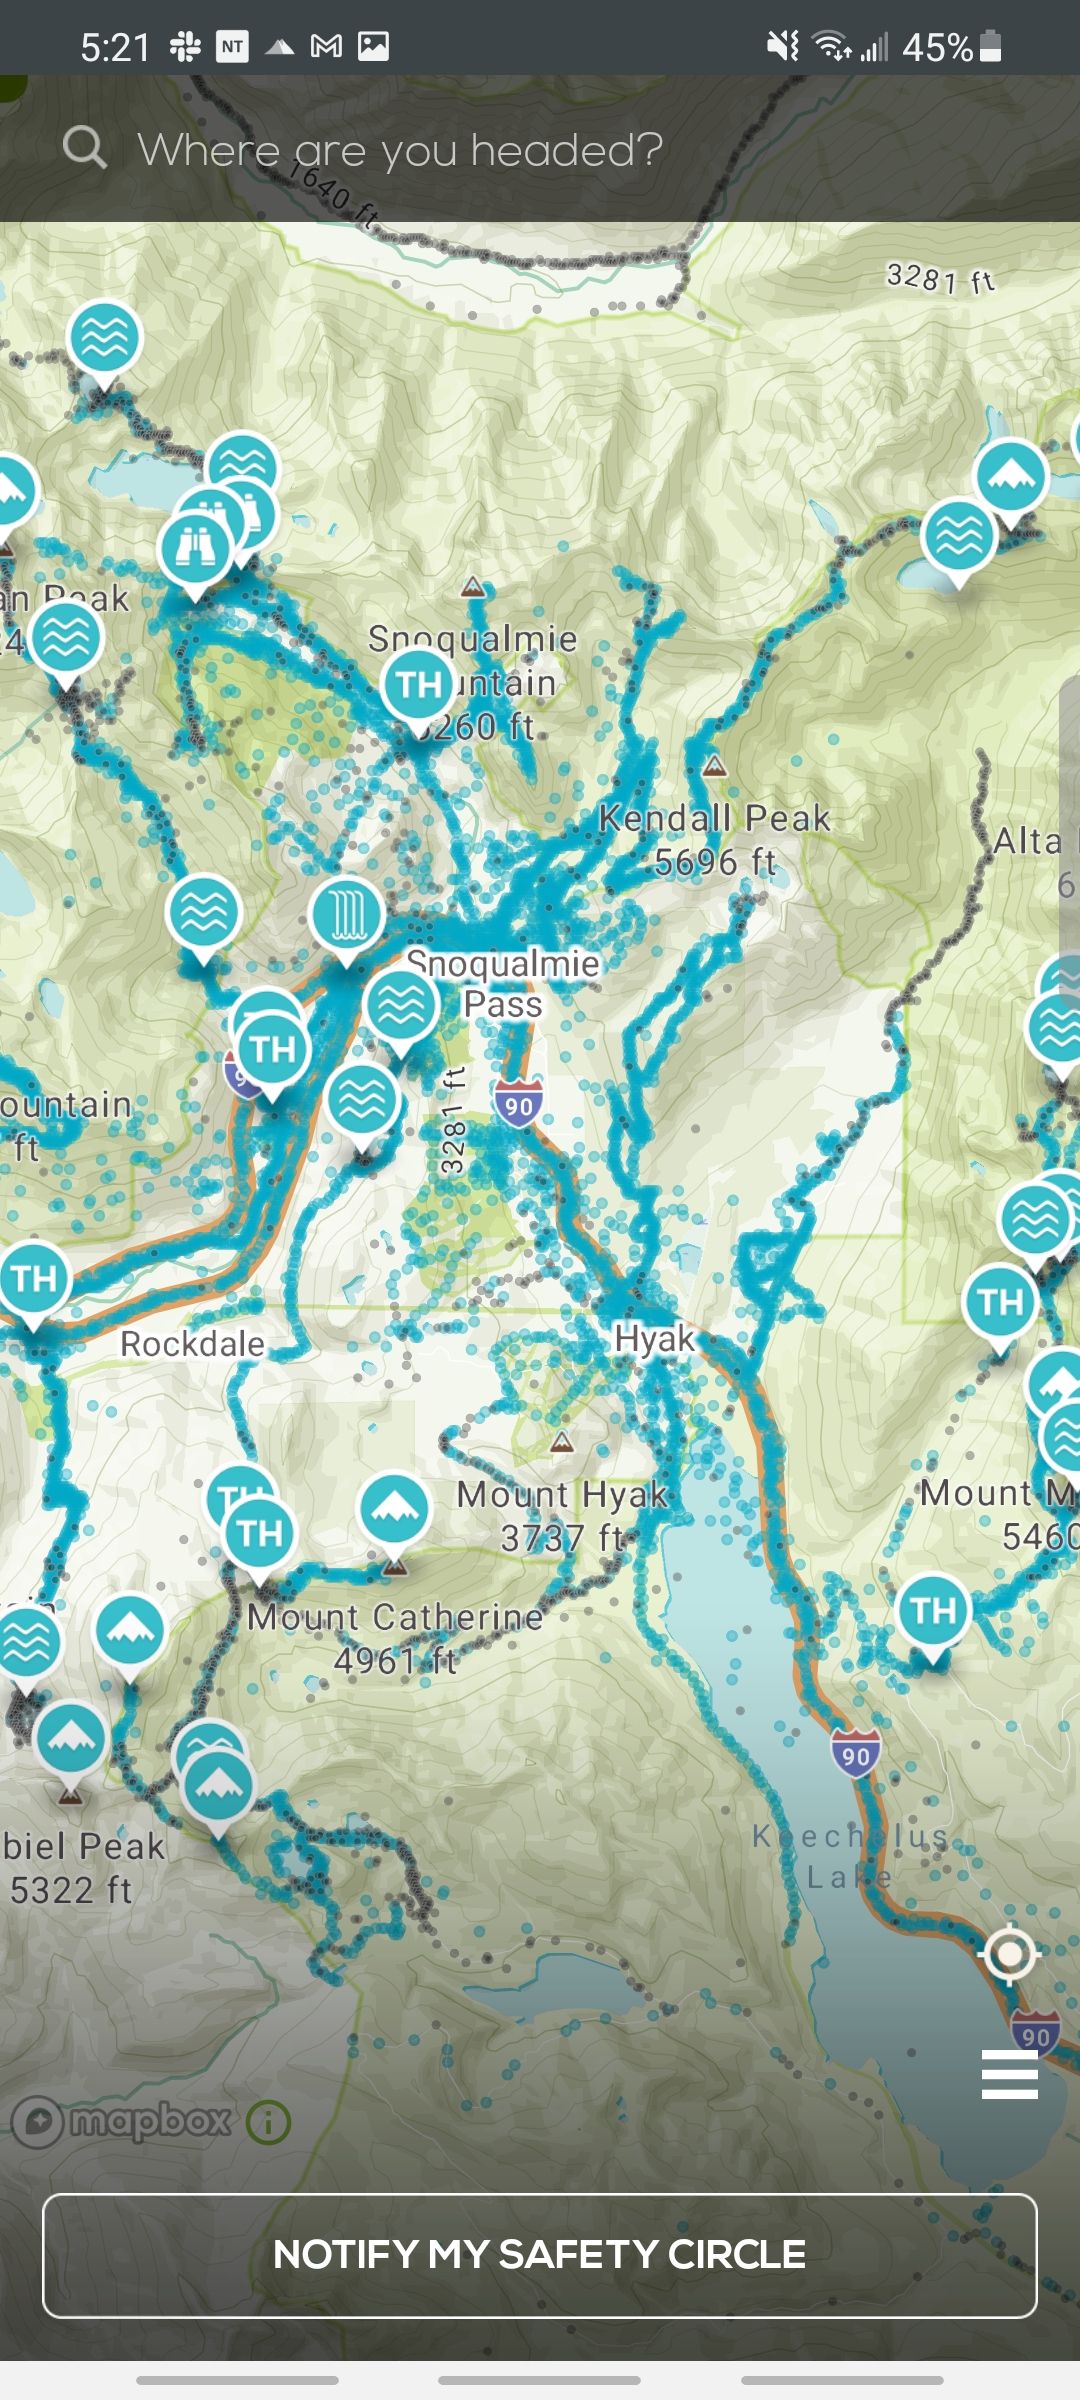 cairn app map view